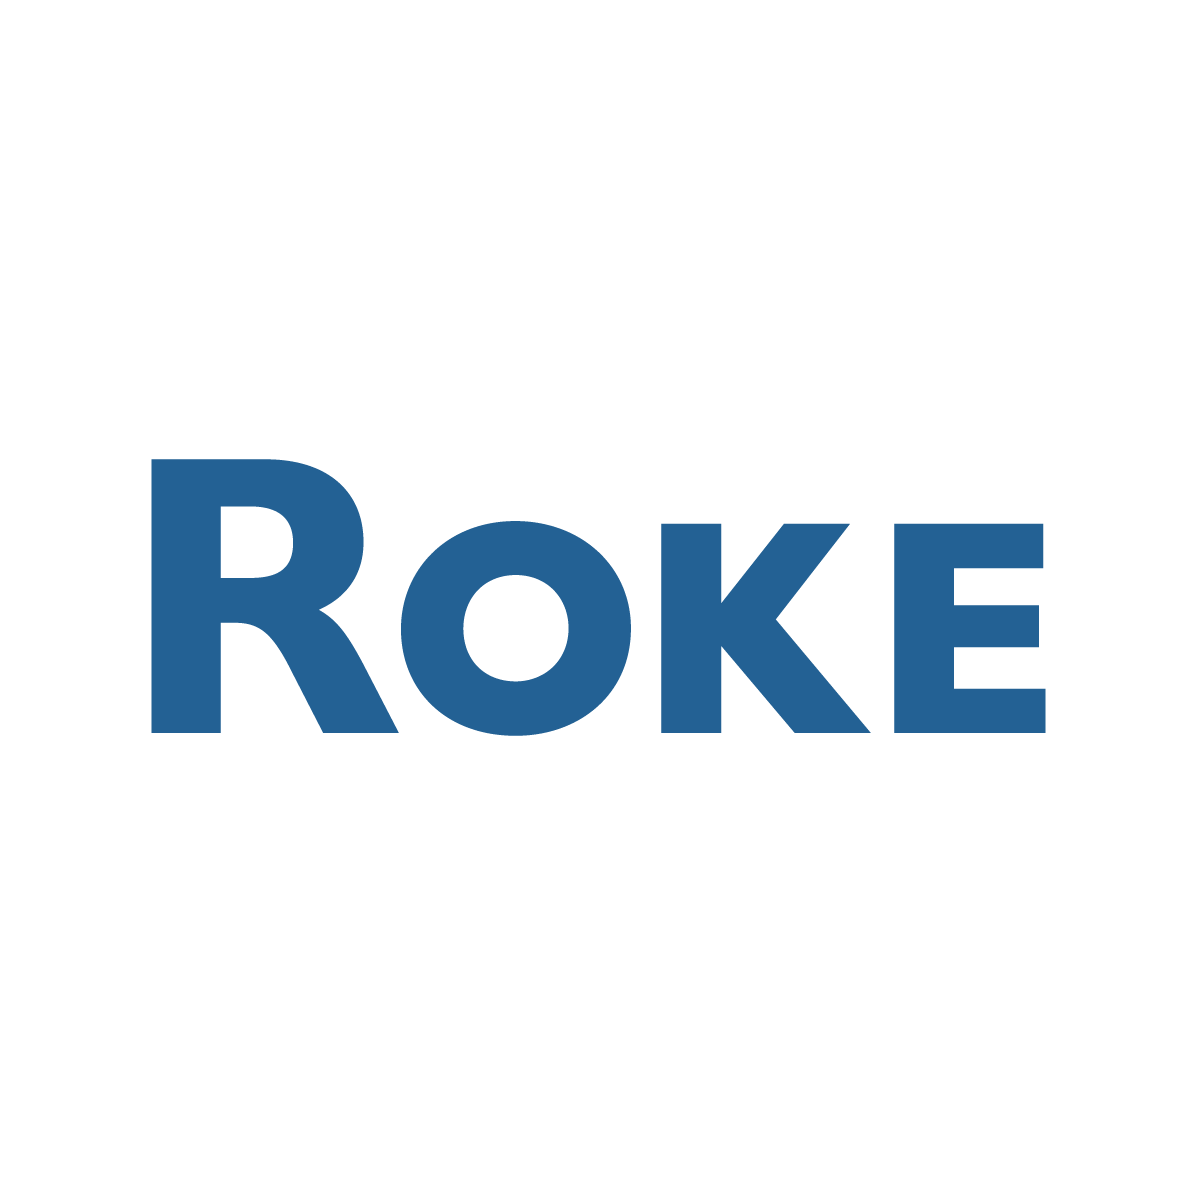 The Roke Manor Research Logo